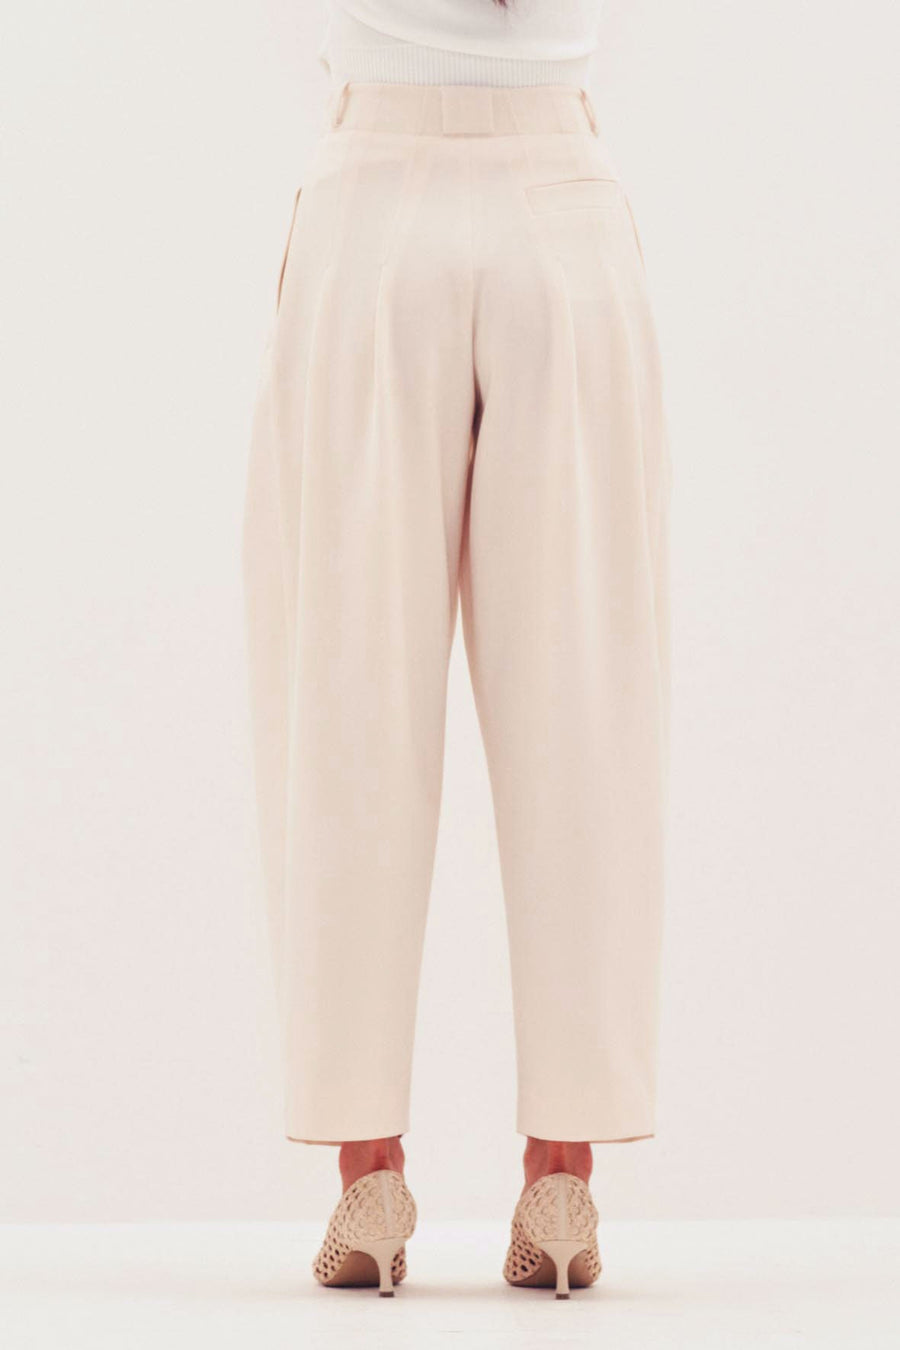 PALMER HARDING SOLO TROUSERS IN IVORY WOOL